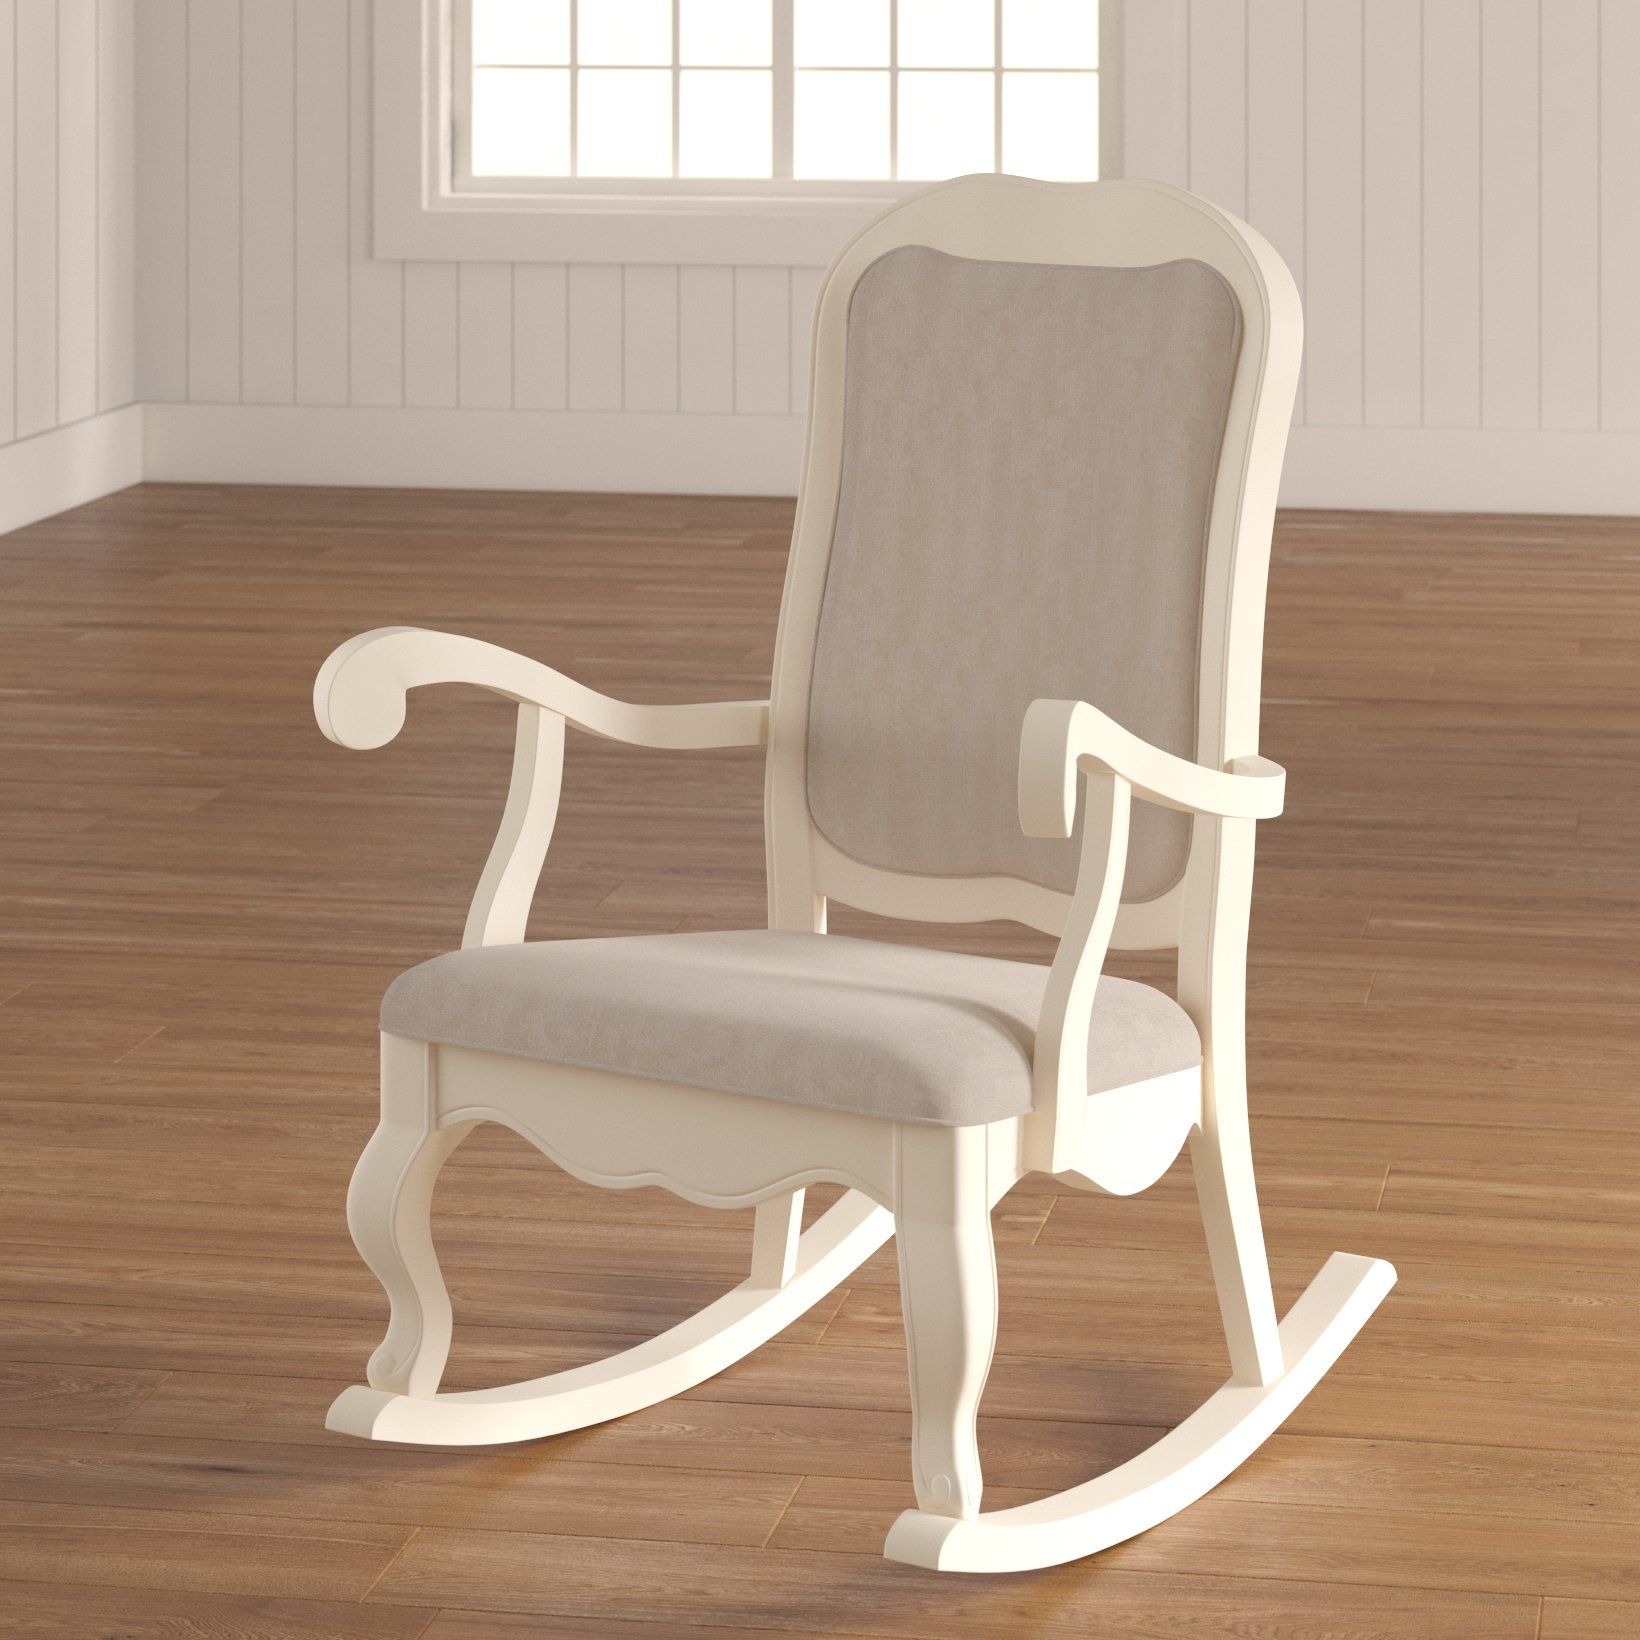 20 Best Collection of Antique White Wooden Rocking Chairs